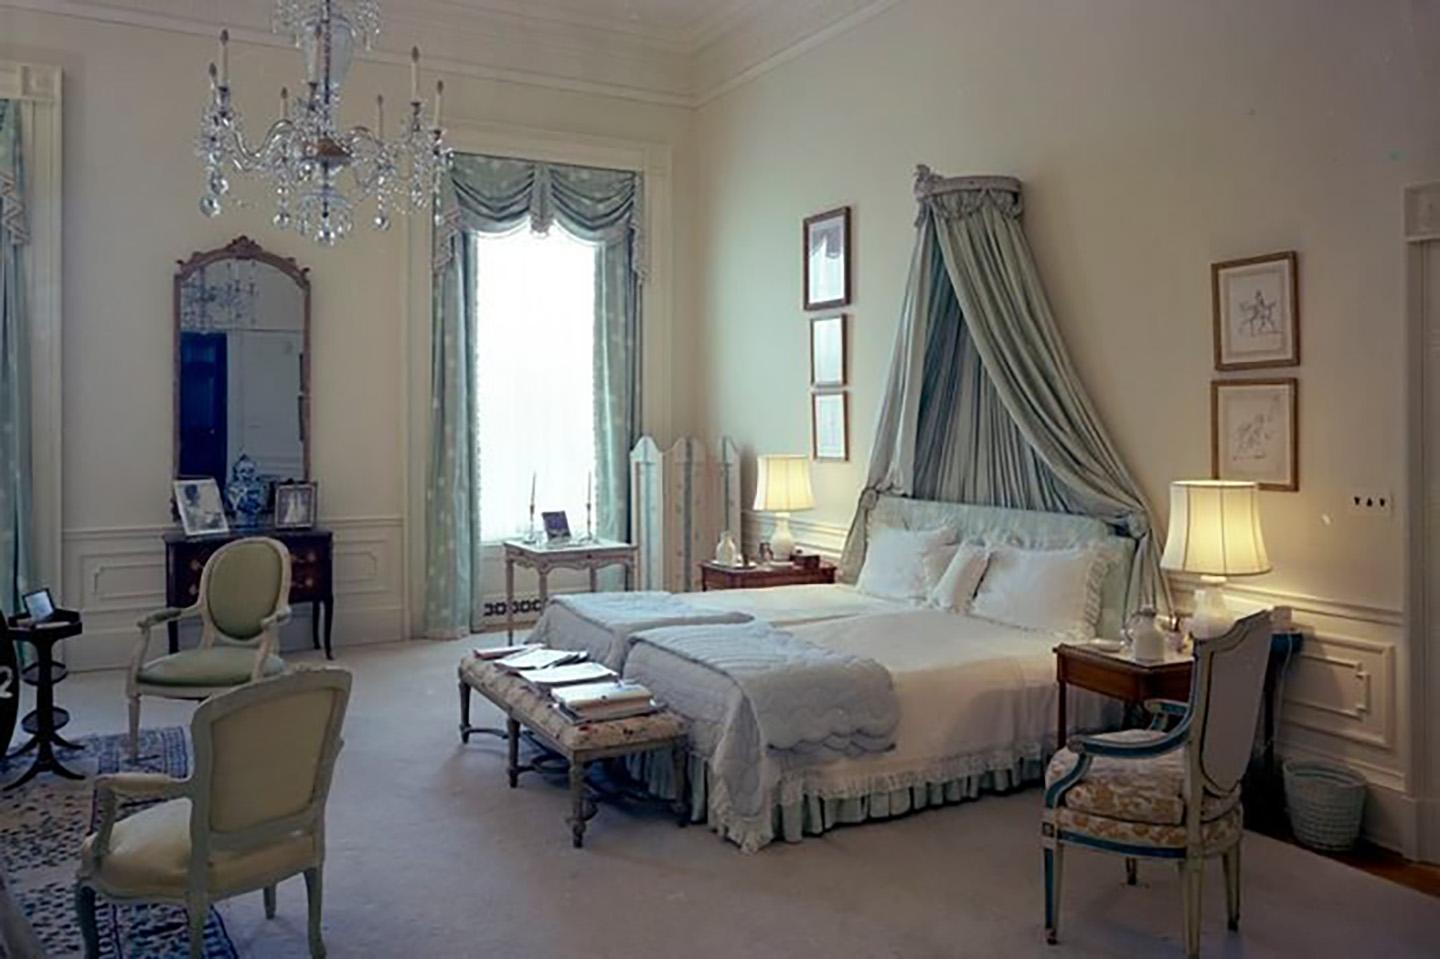 President John F. and First Lady Jacqueline Kennedy’s White House Bedroom Chairs For Sale 1